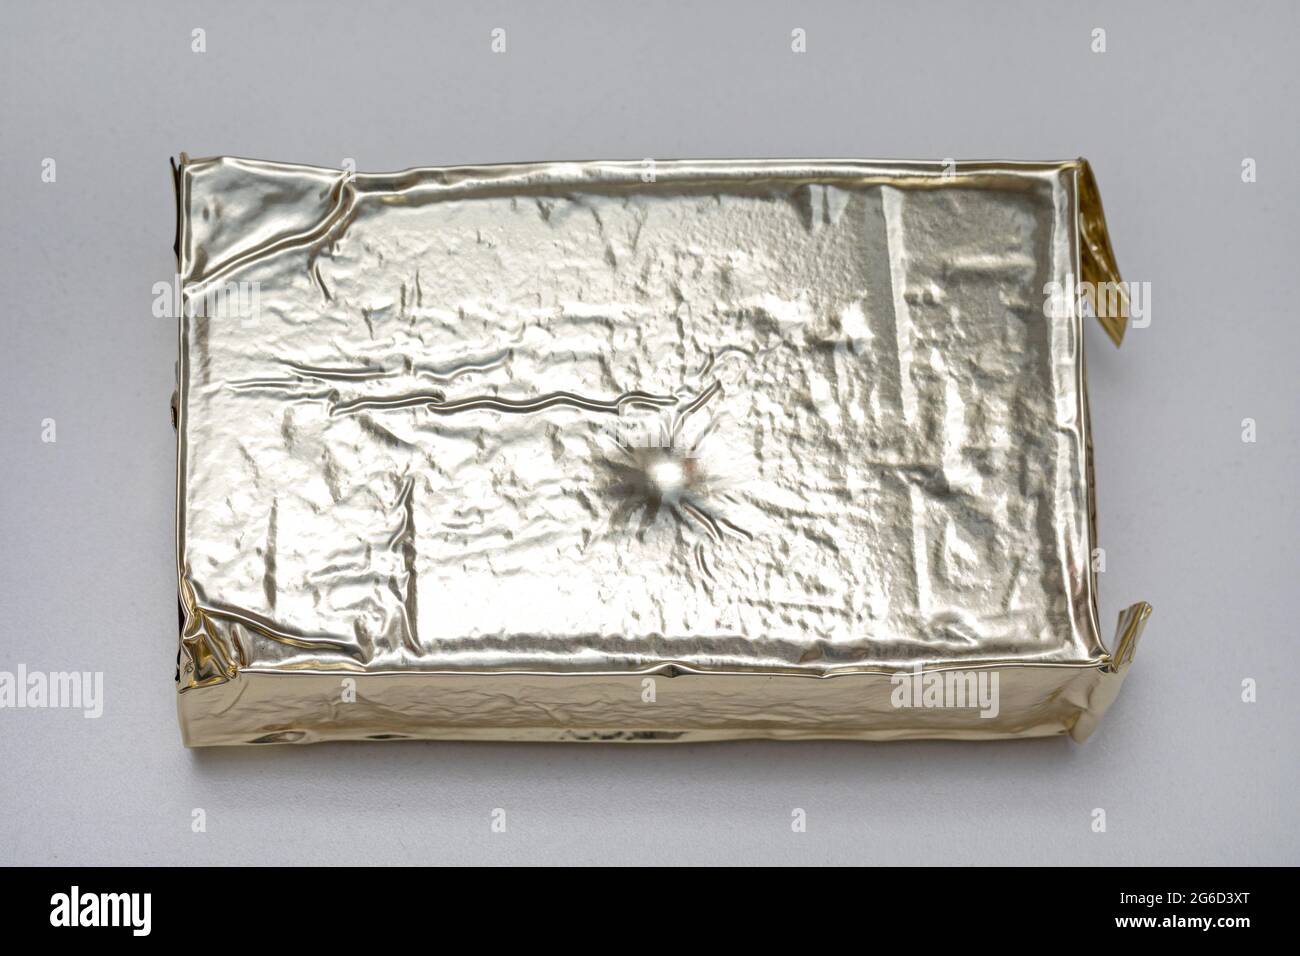 Ground Coffee Vacuum Packaging in Golden Foil Stock Photo - Alamy